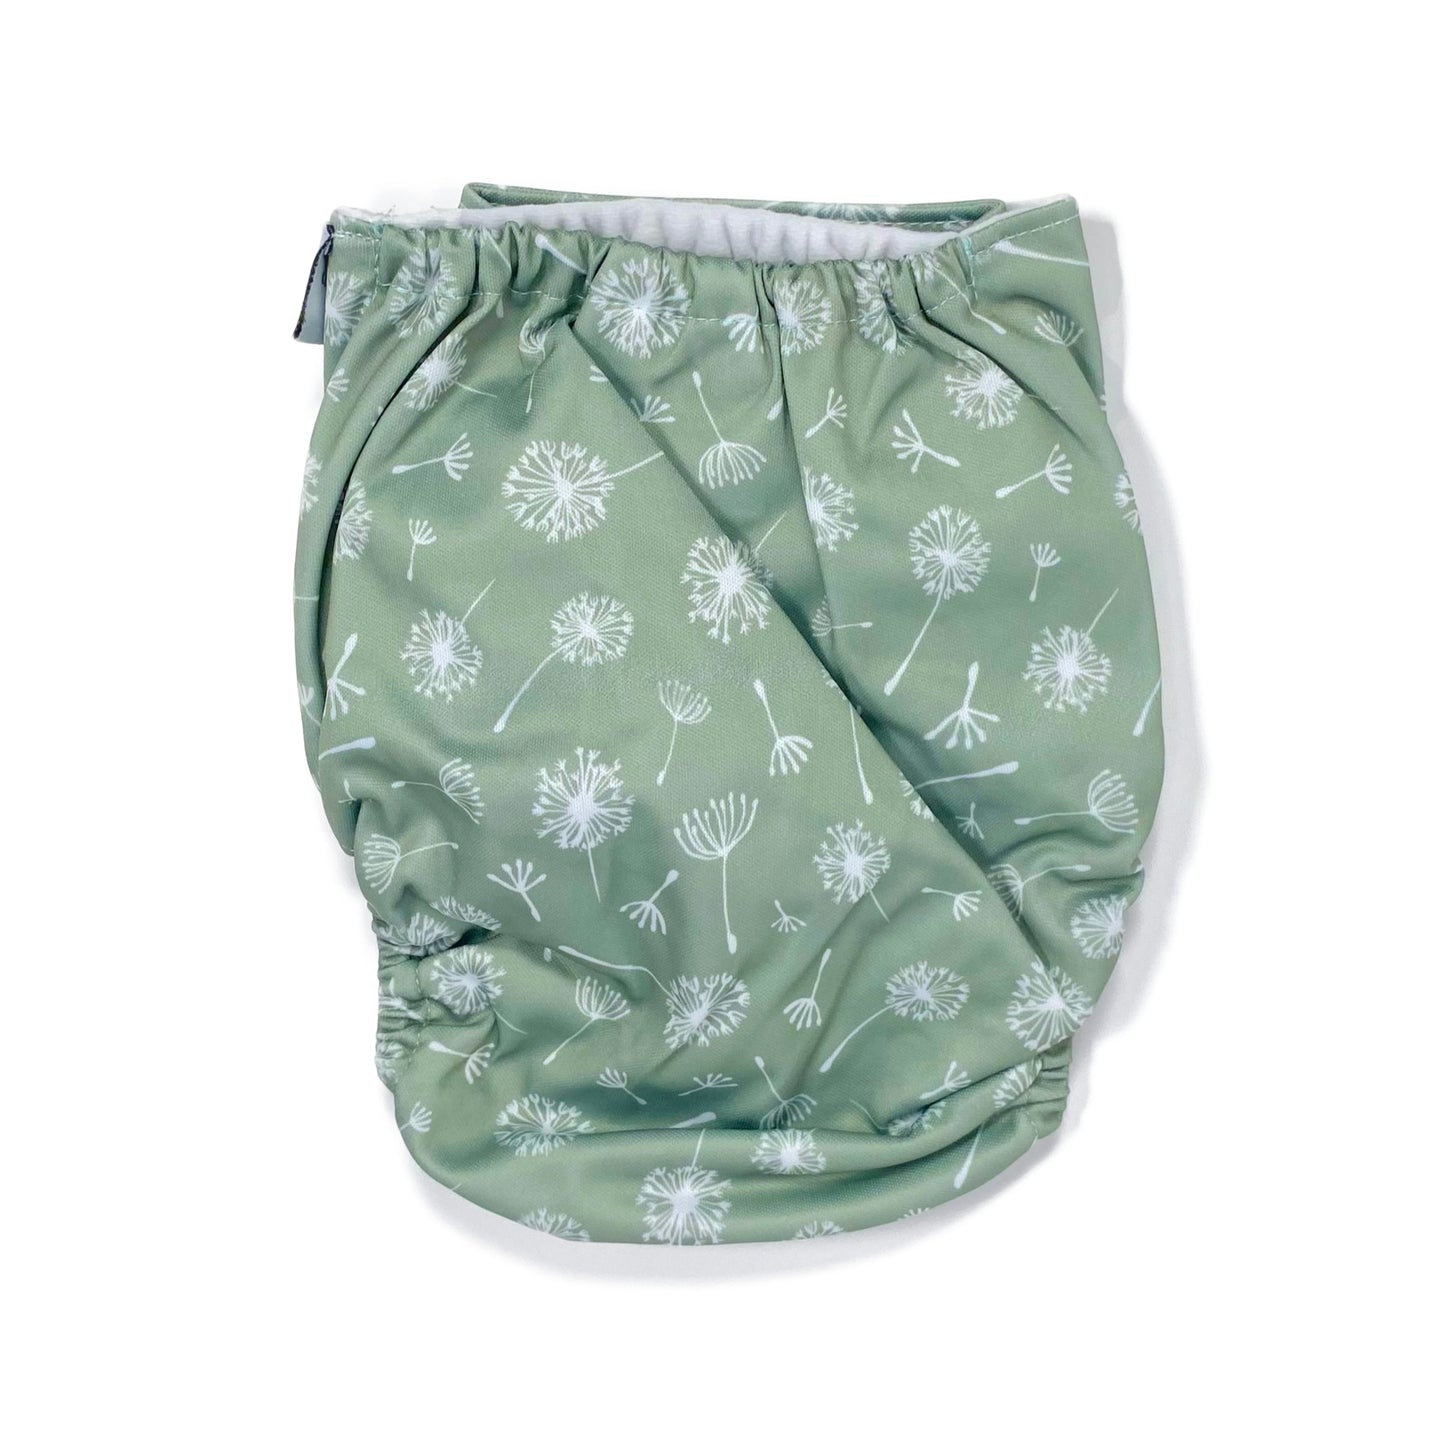 An adjustable reusable nappy for babies and toddlers, featuring a green dandelion design, with images of dandelion seeds on a green background. View shows the back of the nappy.